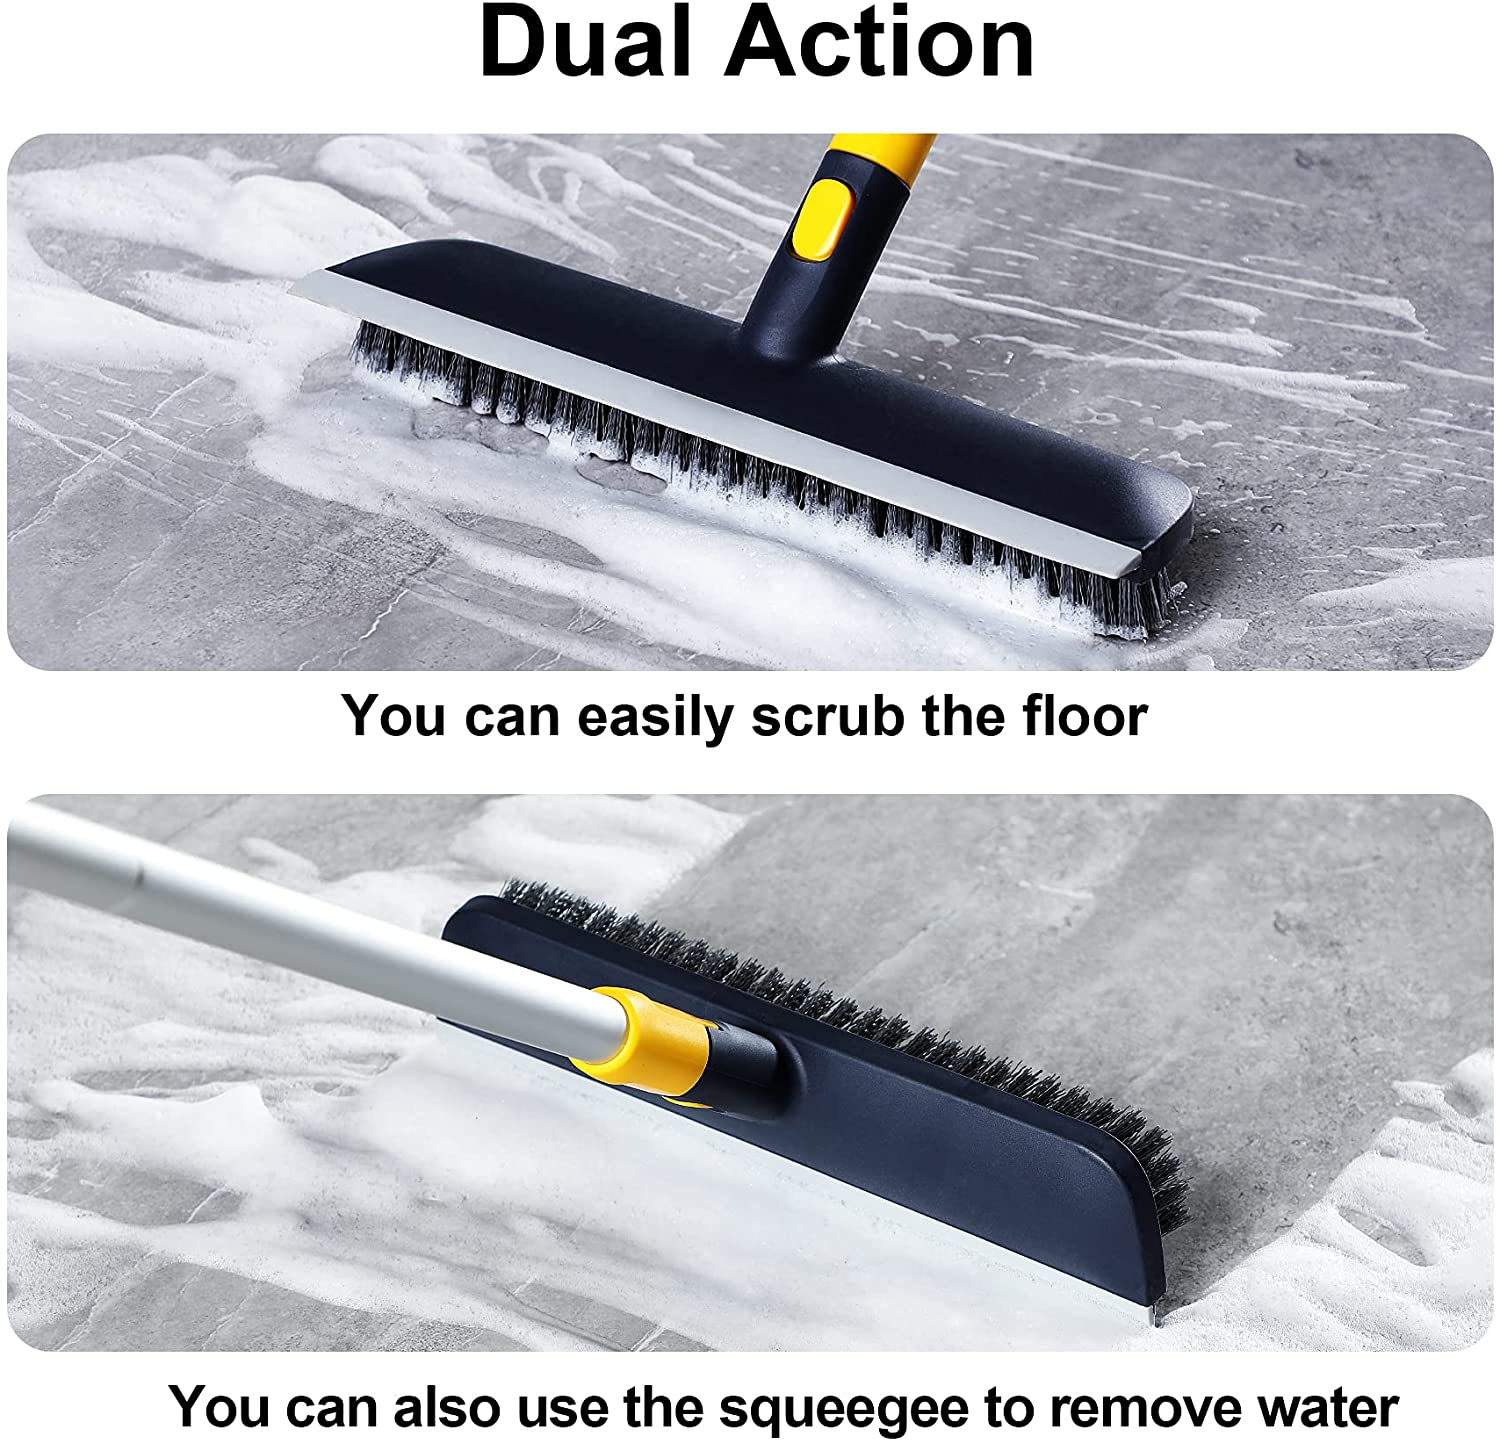 Crevice Cleaning Brush, 1 Cleaning Scrub Brush Scraping Floor